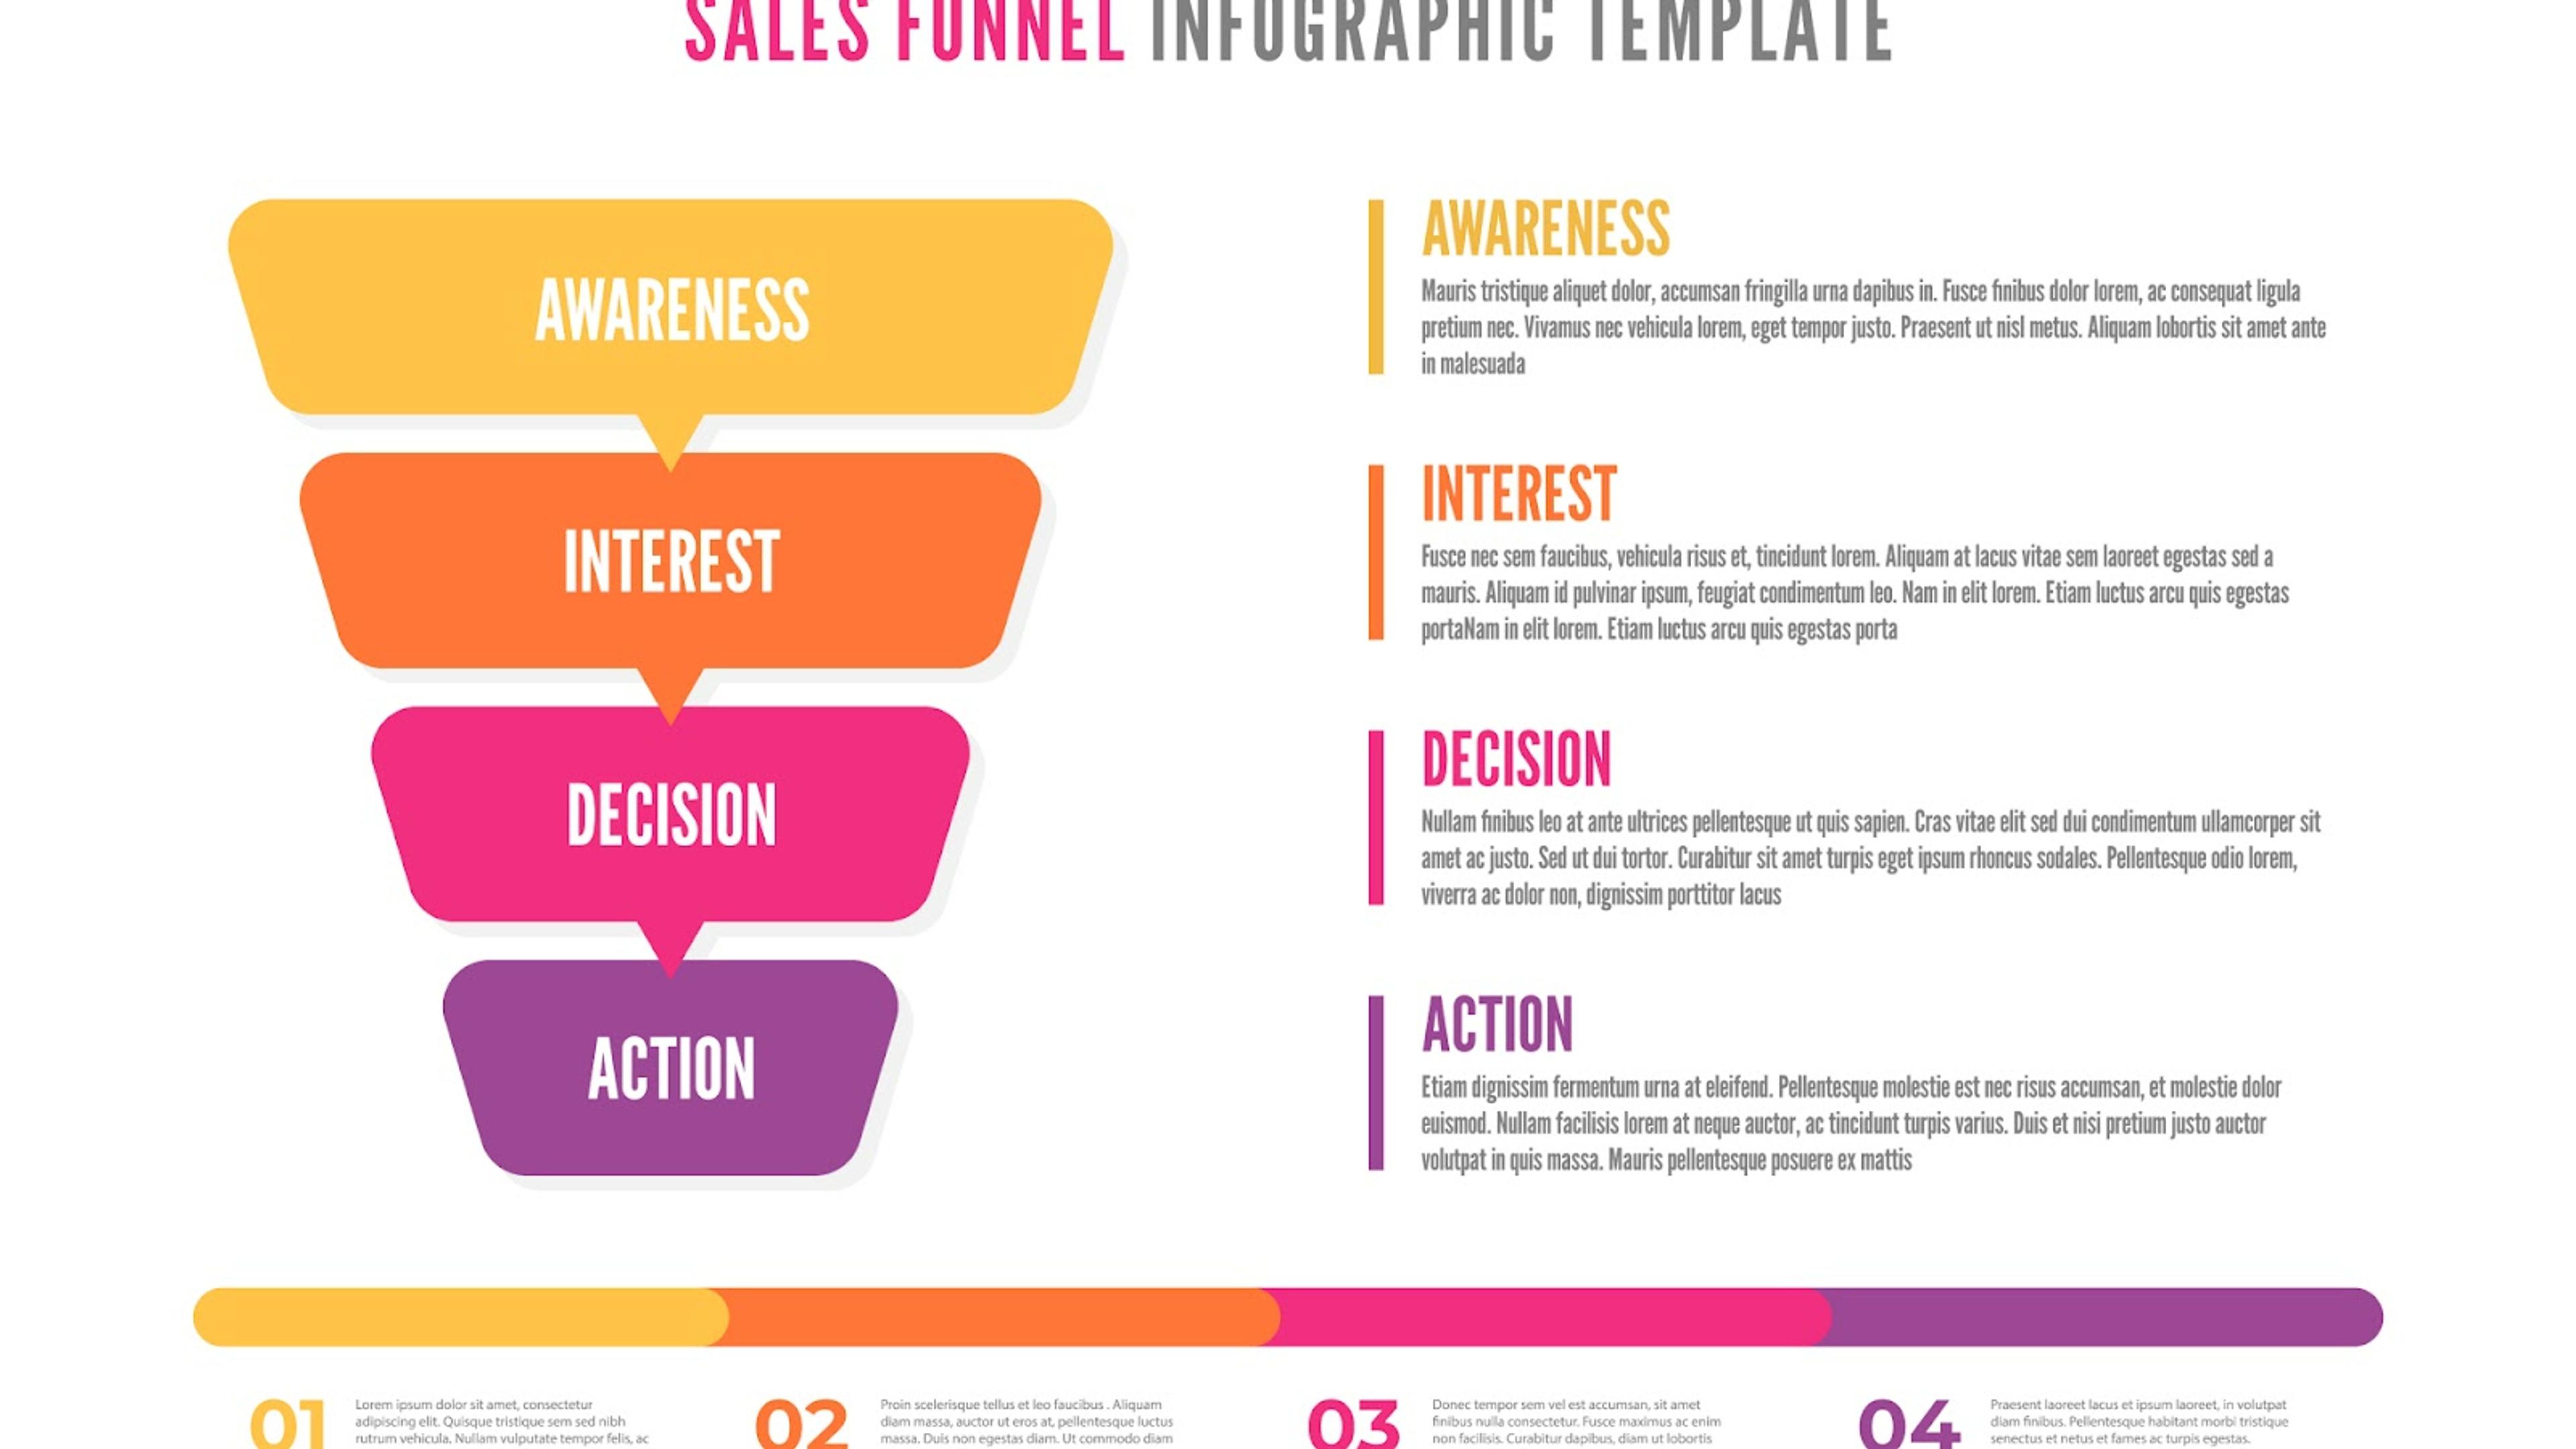 What is the Purpose of a Sales Funnel?